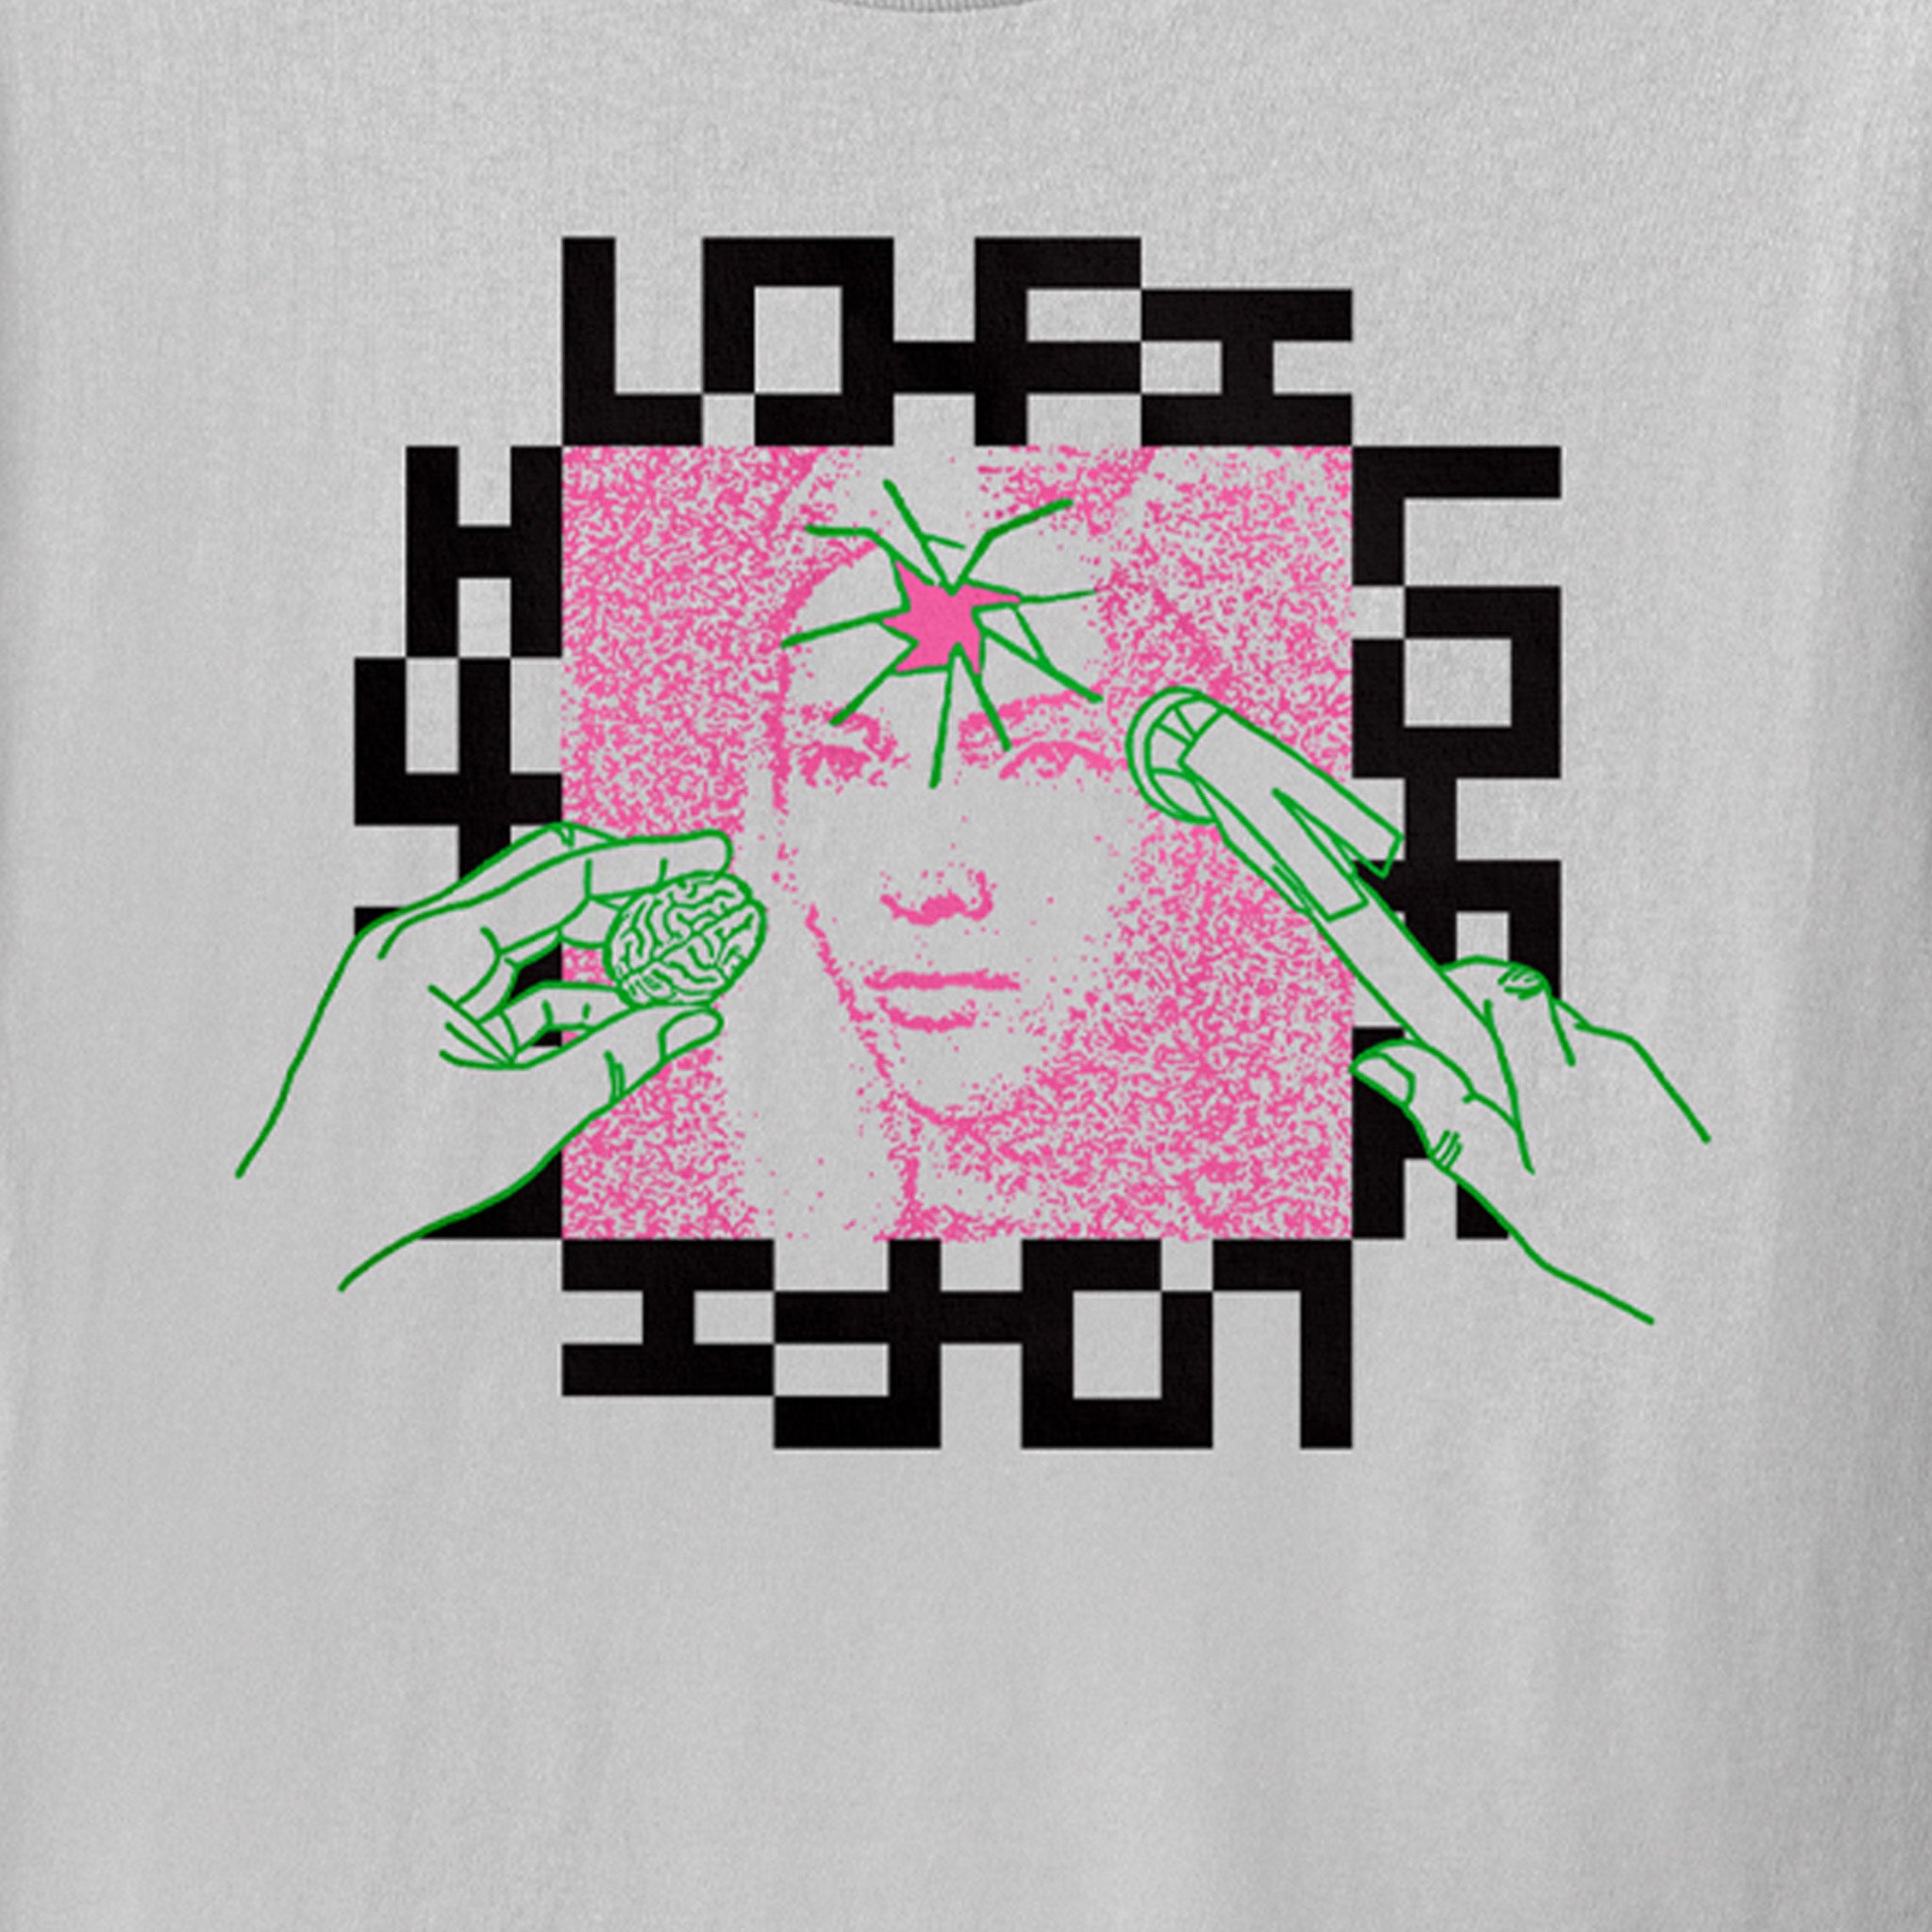 Lo-Fi Transplant Tee (Cement) - August Shop